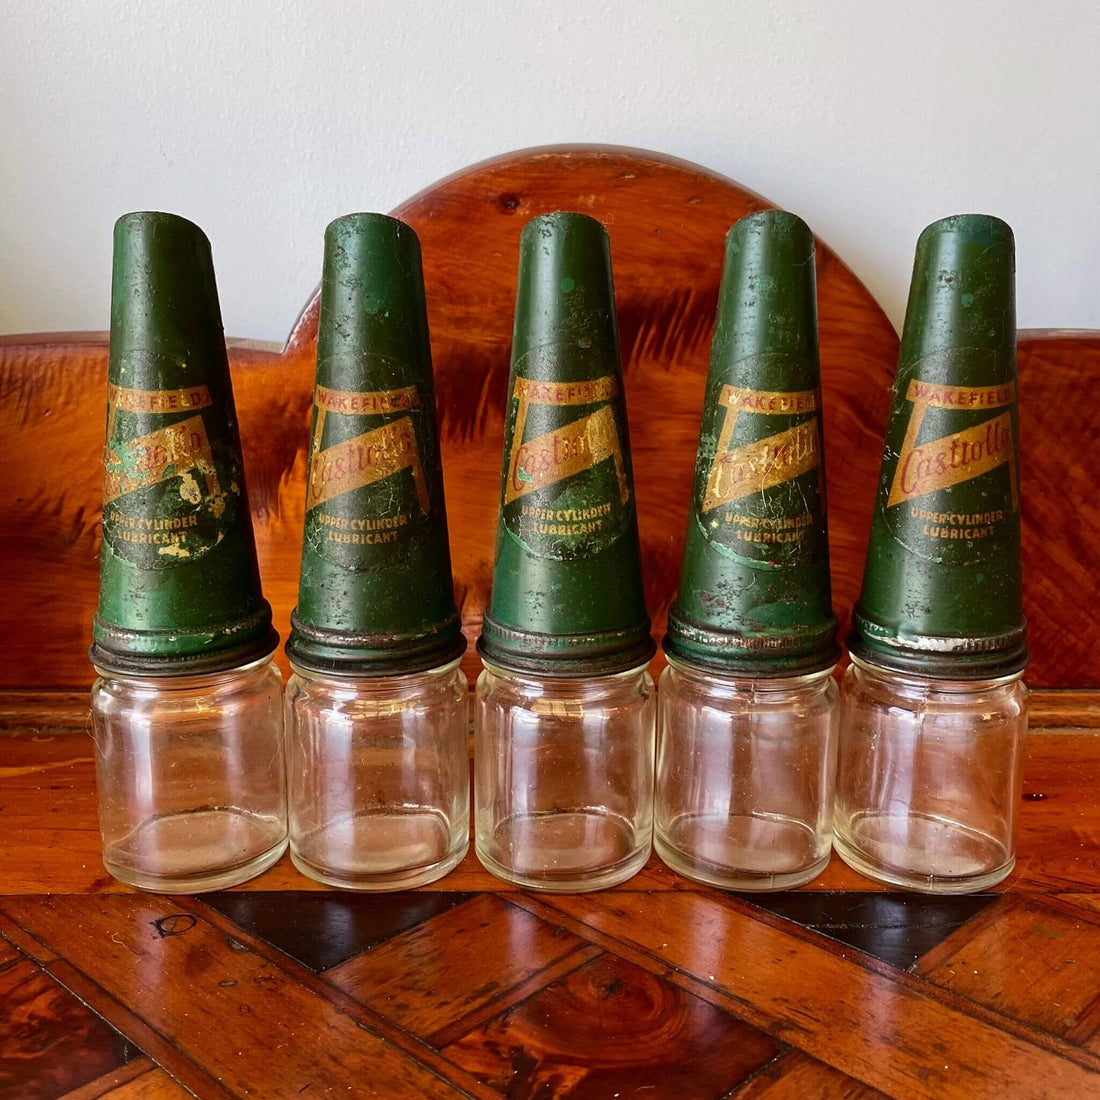 Antique and collectable castrol oil bottles